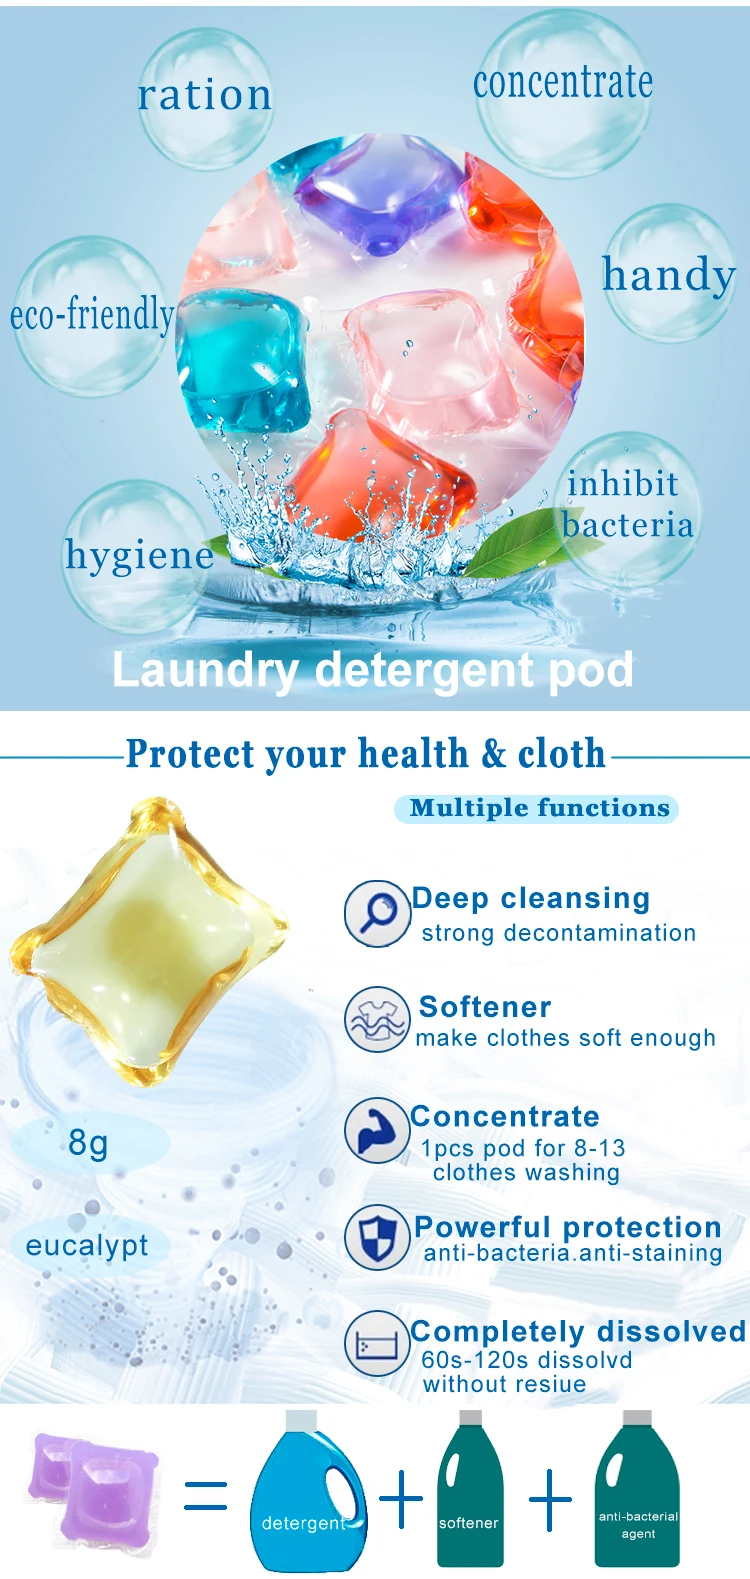 2021 Hot Sale Multi-function dry washing powder box pods Capsules brand name laundry detergent